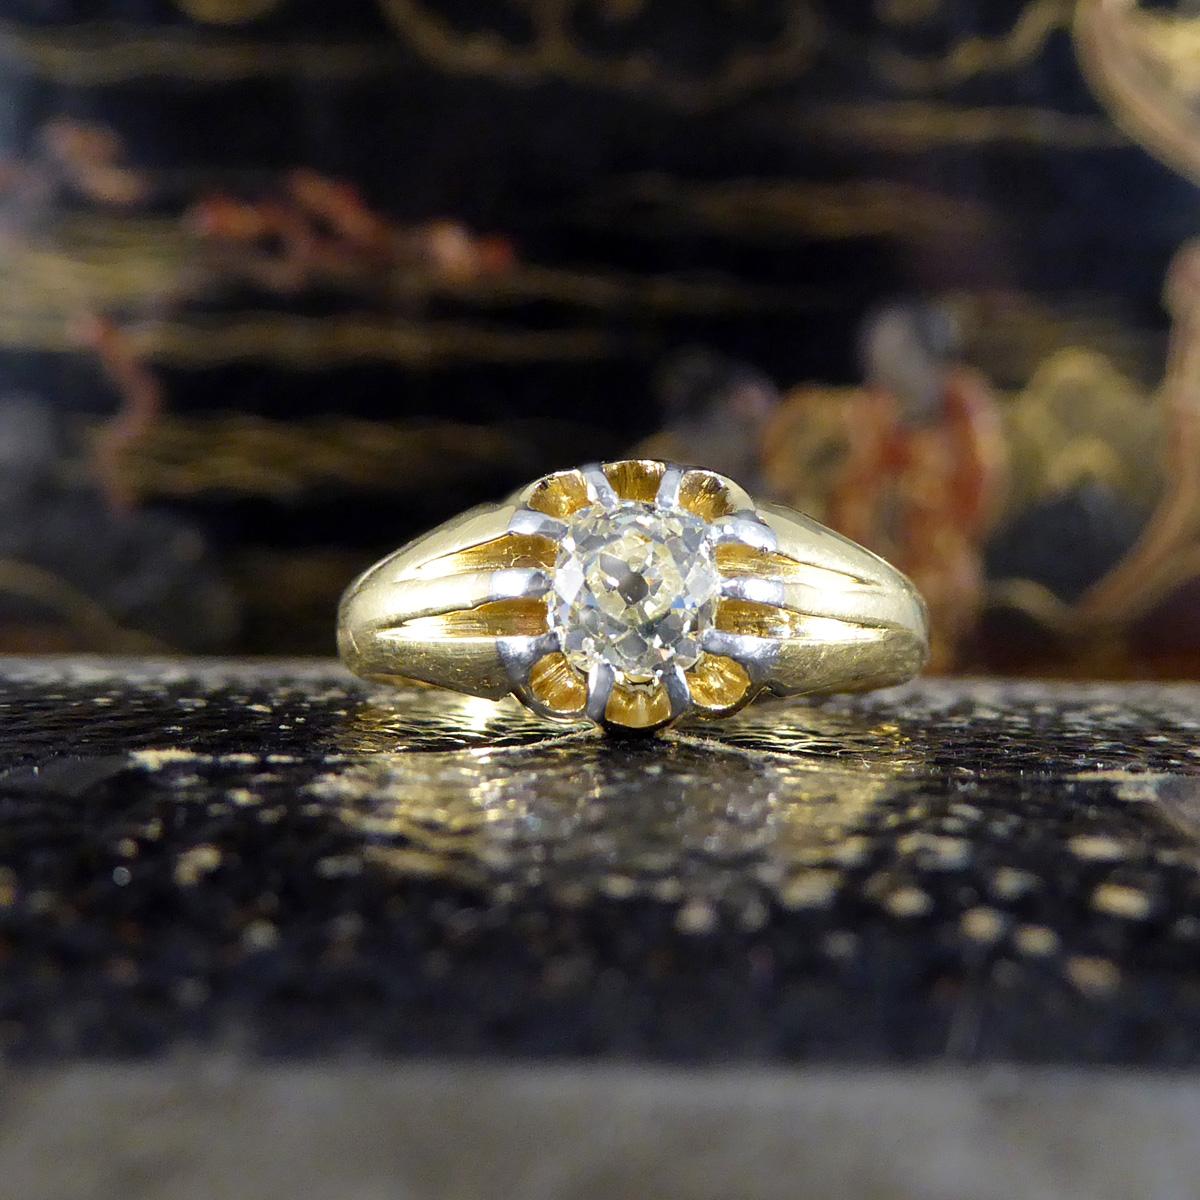 Antique Late Victorian Old Cushion Cut Diamond Ring in 18ct Gold &Plat For Sale 3